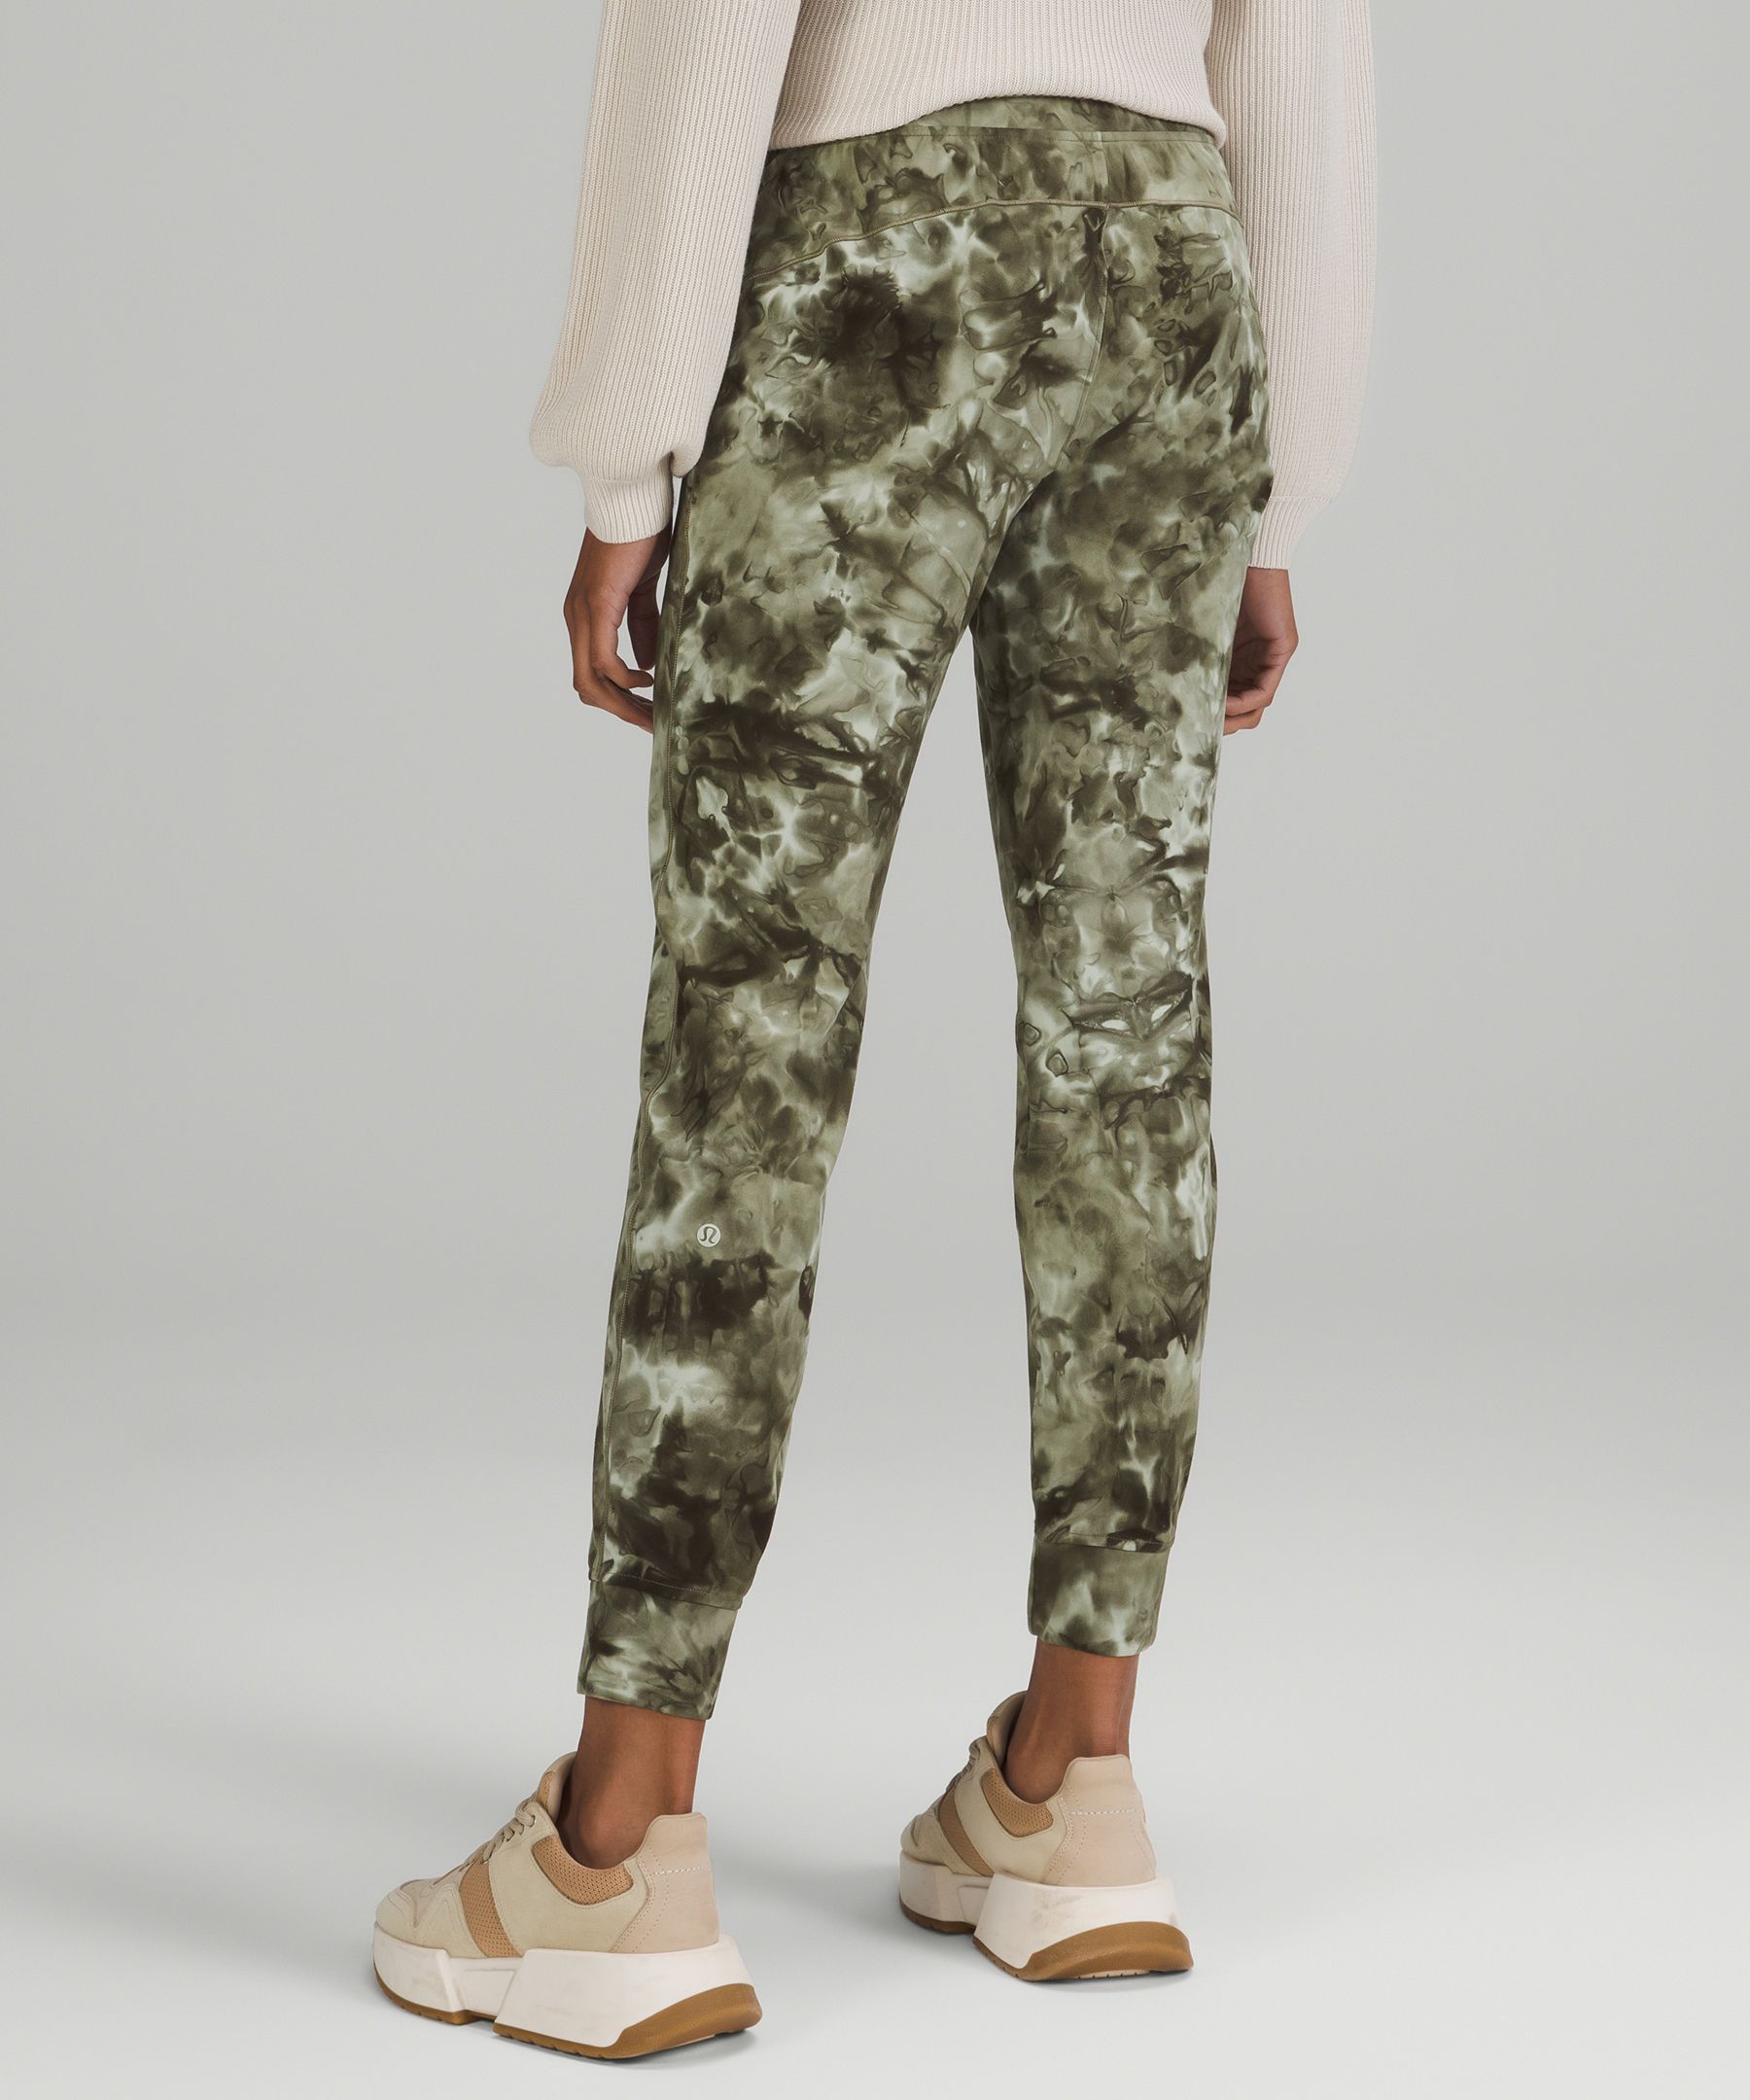 Lululemon camo ready to rulu jogger, size 4 (price reduced: was